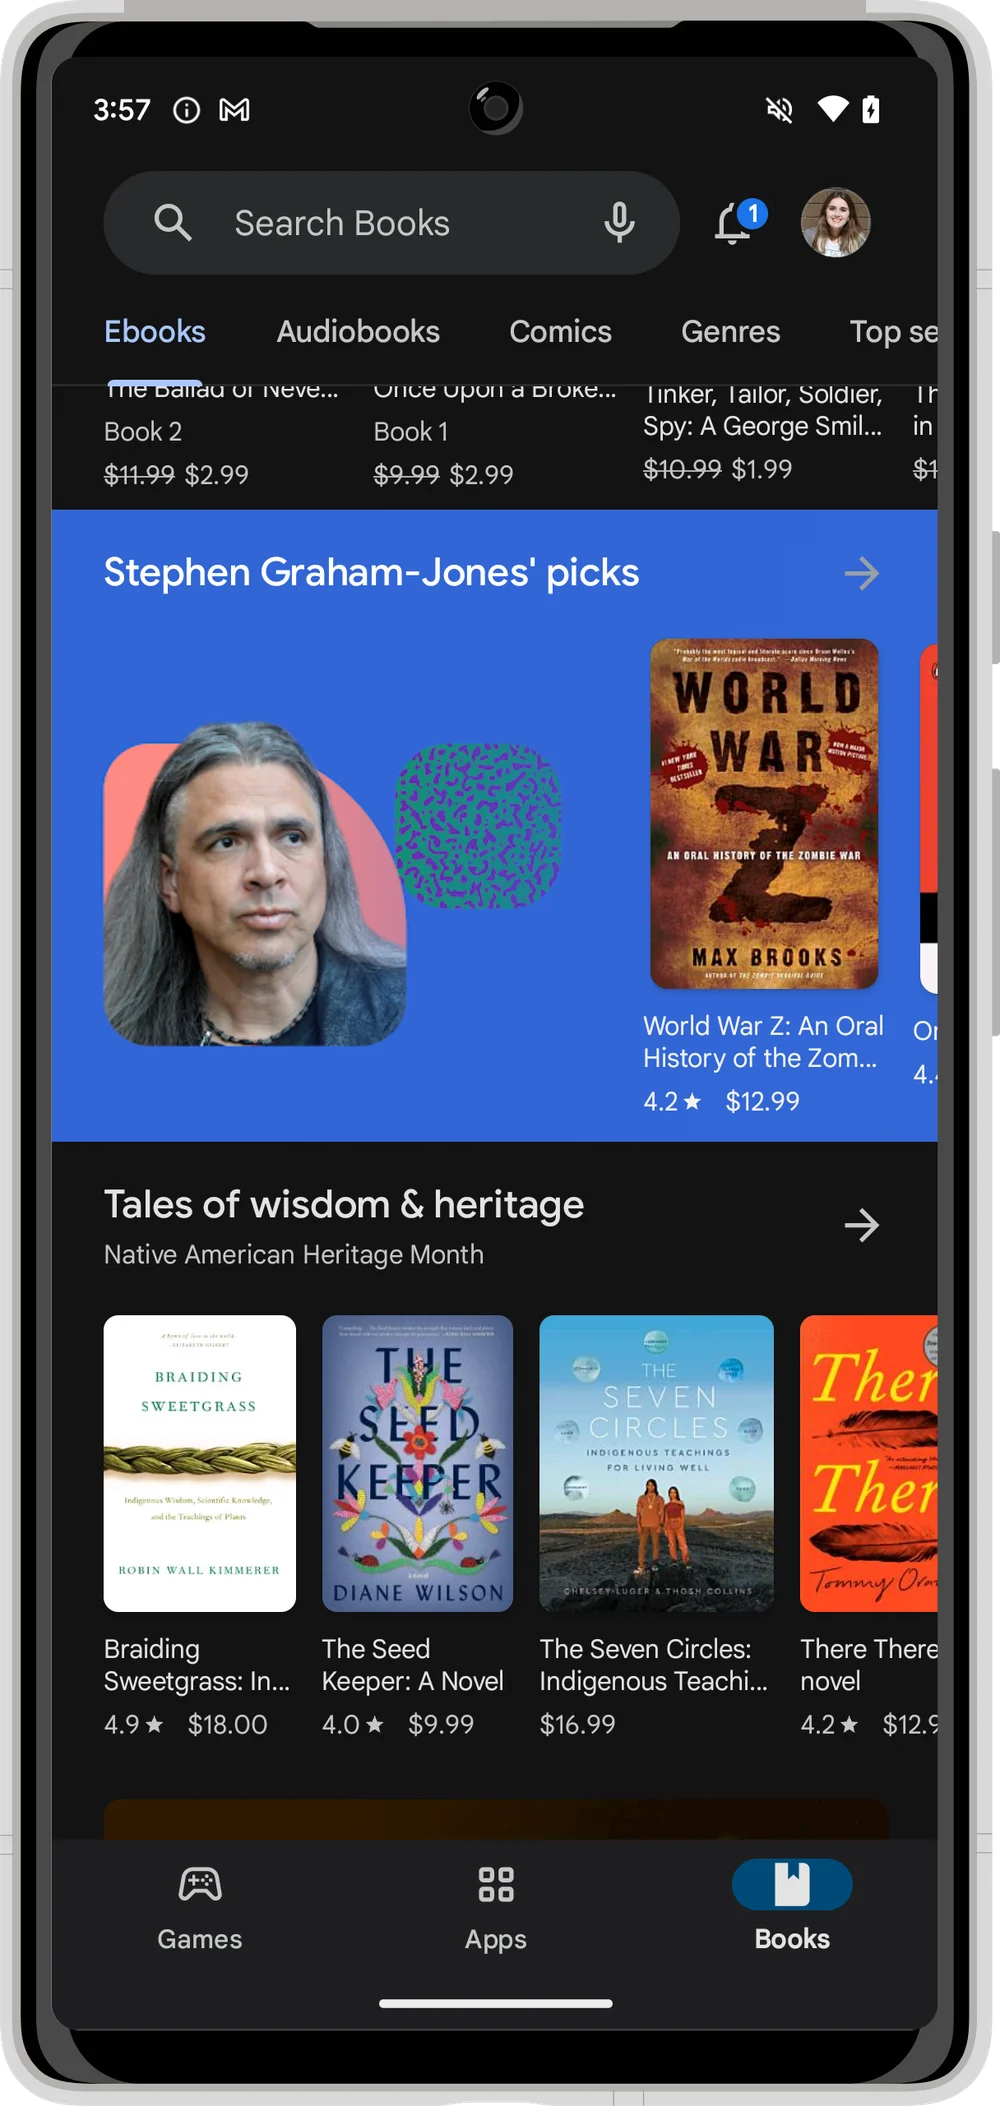 An image of a phone that is in the Google Play Store Book section. There is a blue background spotlighting “Stephen Graham-Jones’” picks, followed by images of book covers in the category of Tales of wisdom & heritage.